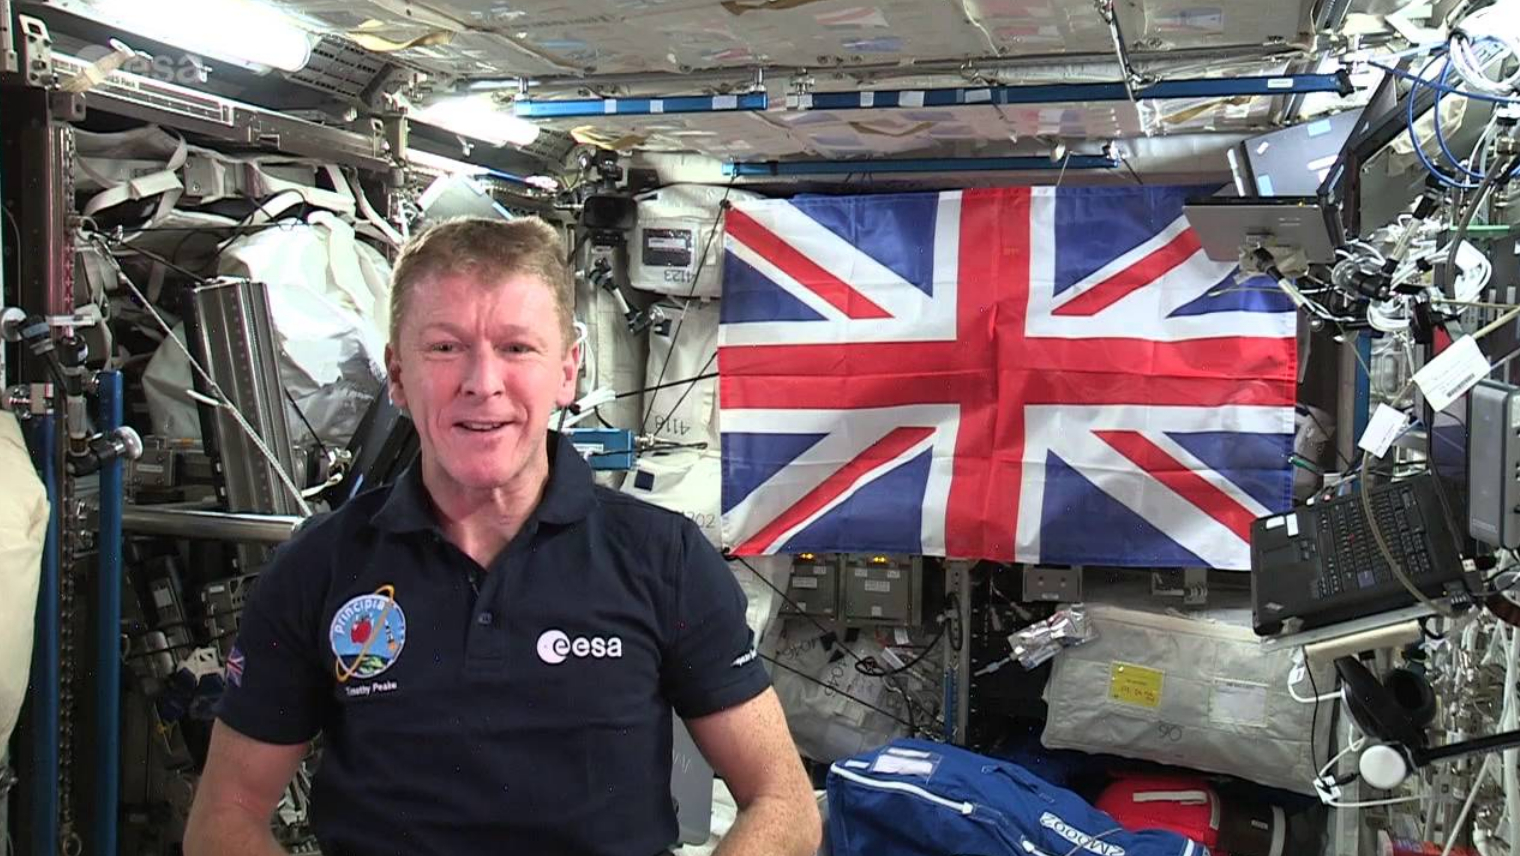 Tim Peake on the International Space Station celebrating the Queen's Birthday